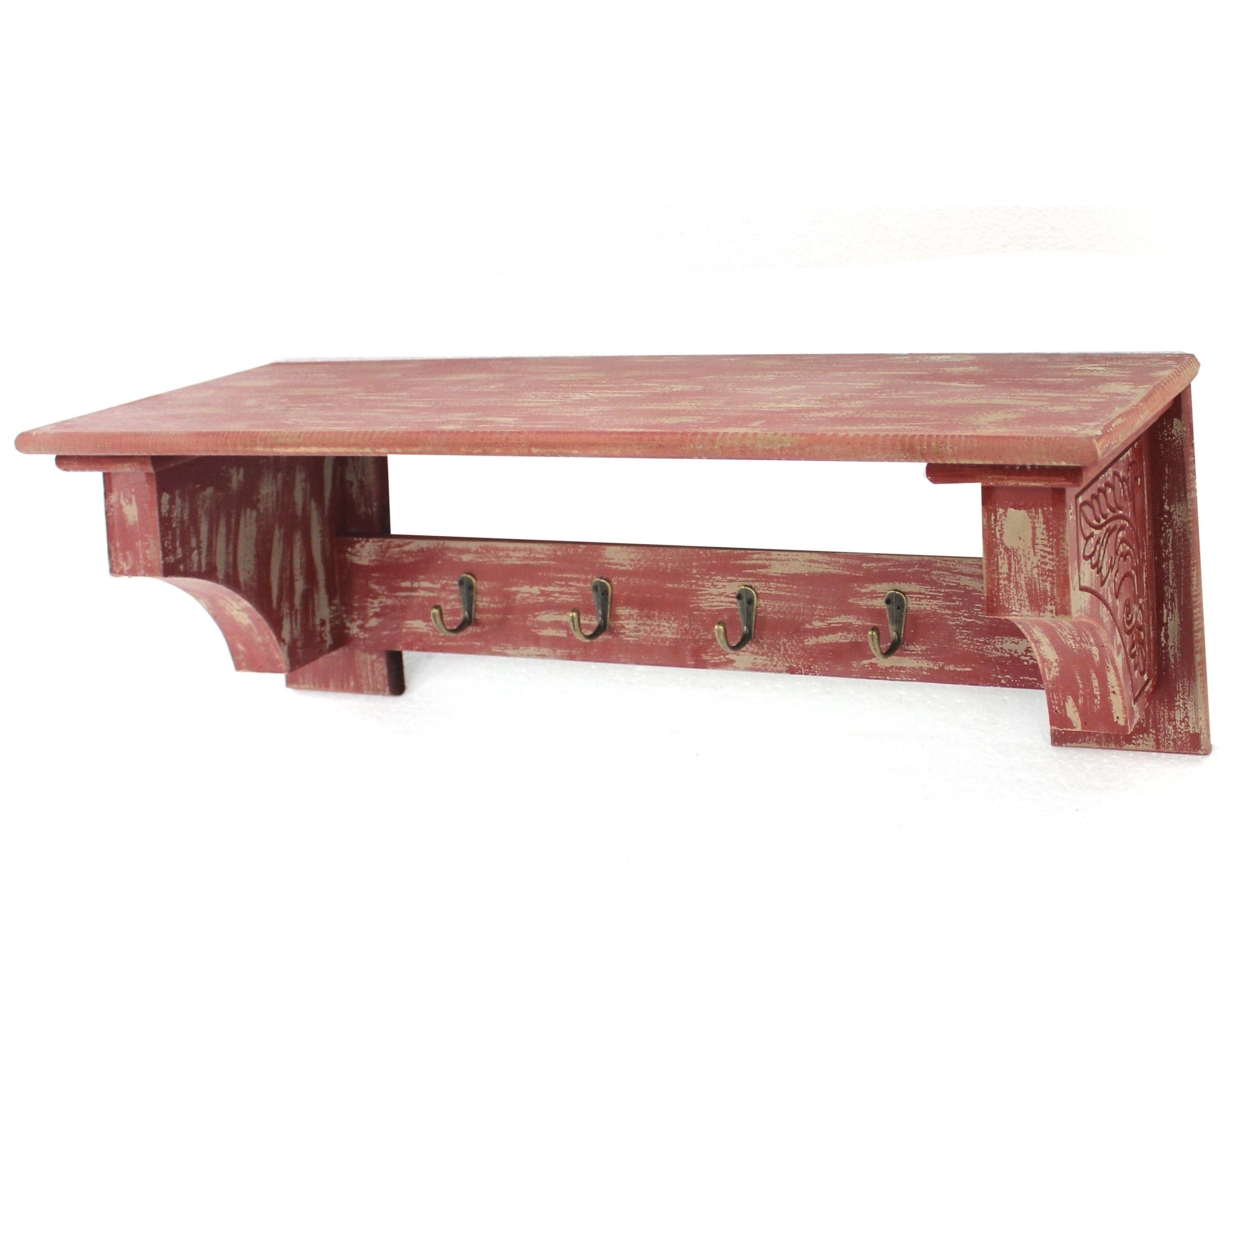 Wooden Wall Shelf With 4 Hooks And Carved Side Frames, Distressed Red- Saltoro Sherpi